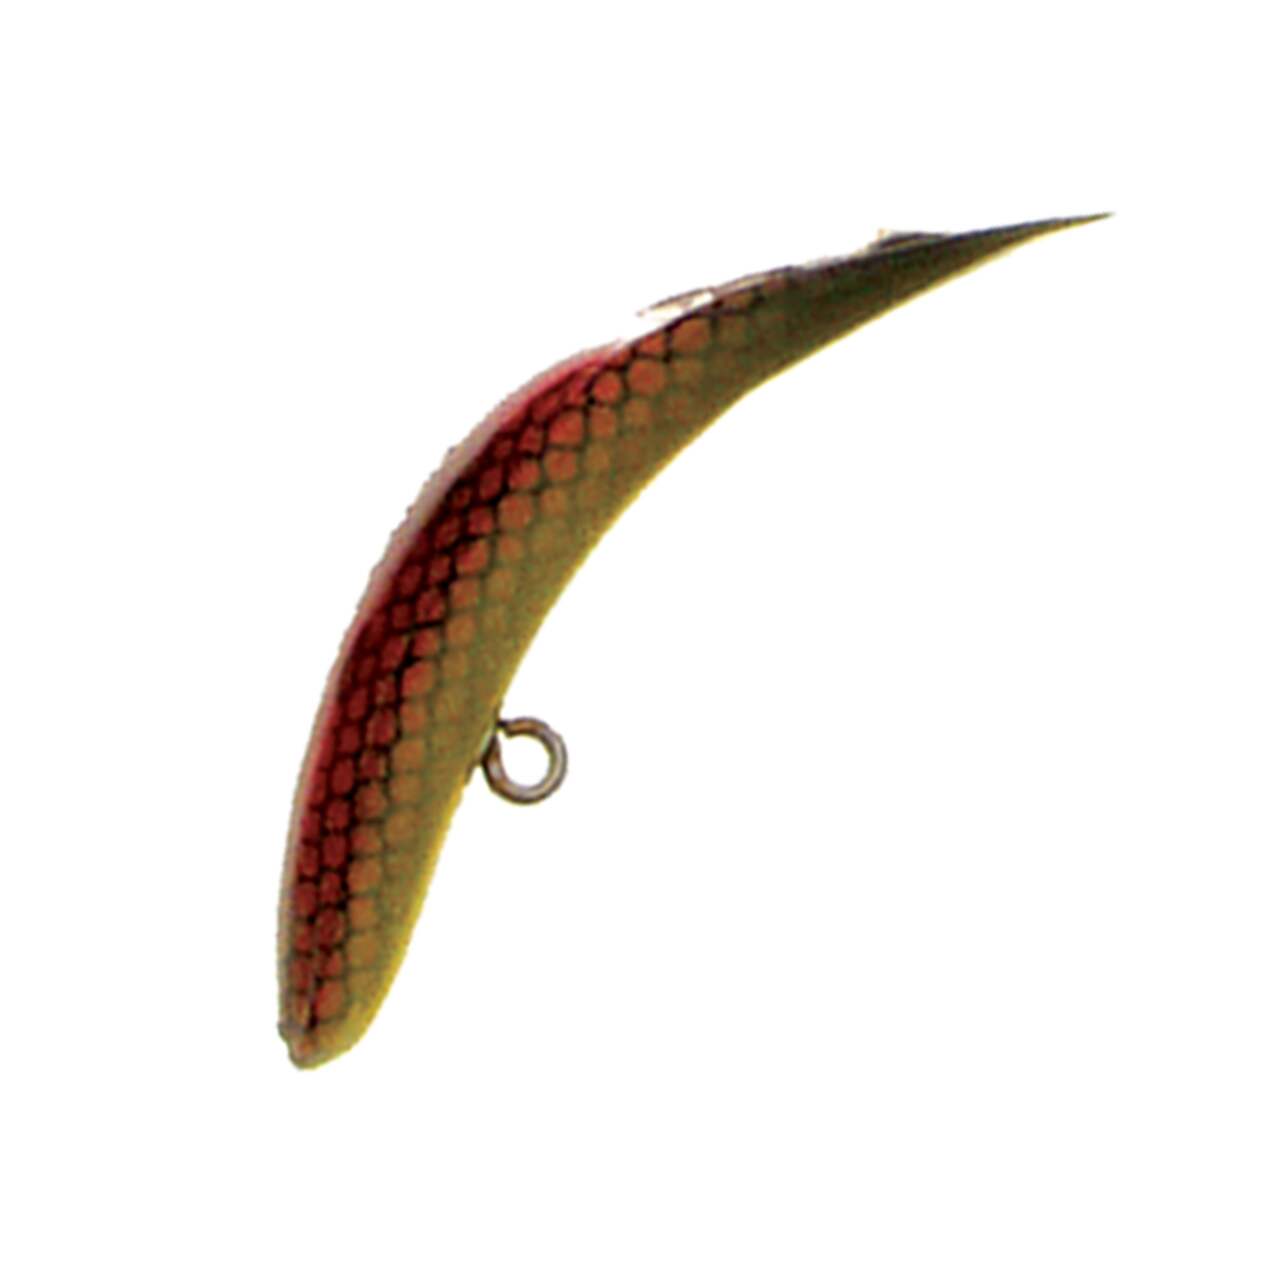 https://media-www.canadiantire.ca/product/playing/fishing/fishing-lures/0789250/luhr-jensen-kwikfish-stoney-1-75--19ad11b7-9c49-49e6-942f-cc4b344e3d3d.png?imdensity=1&imwidth=1244&impolicy=mZoom